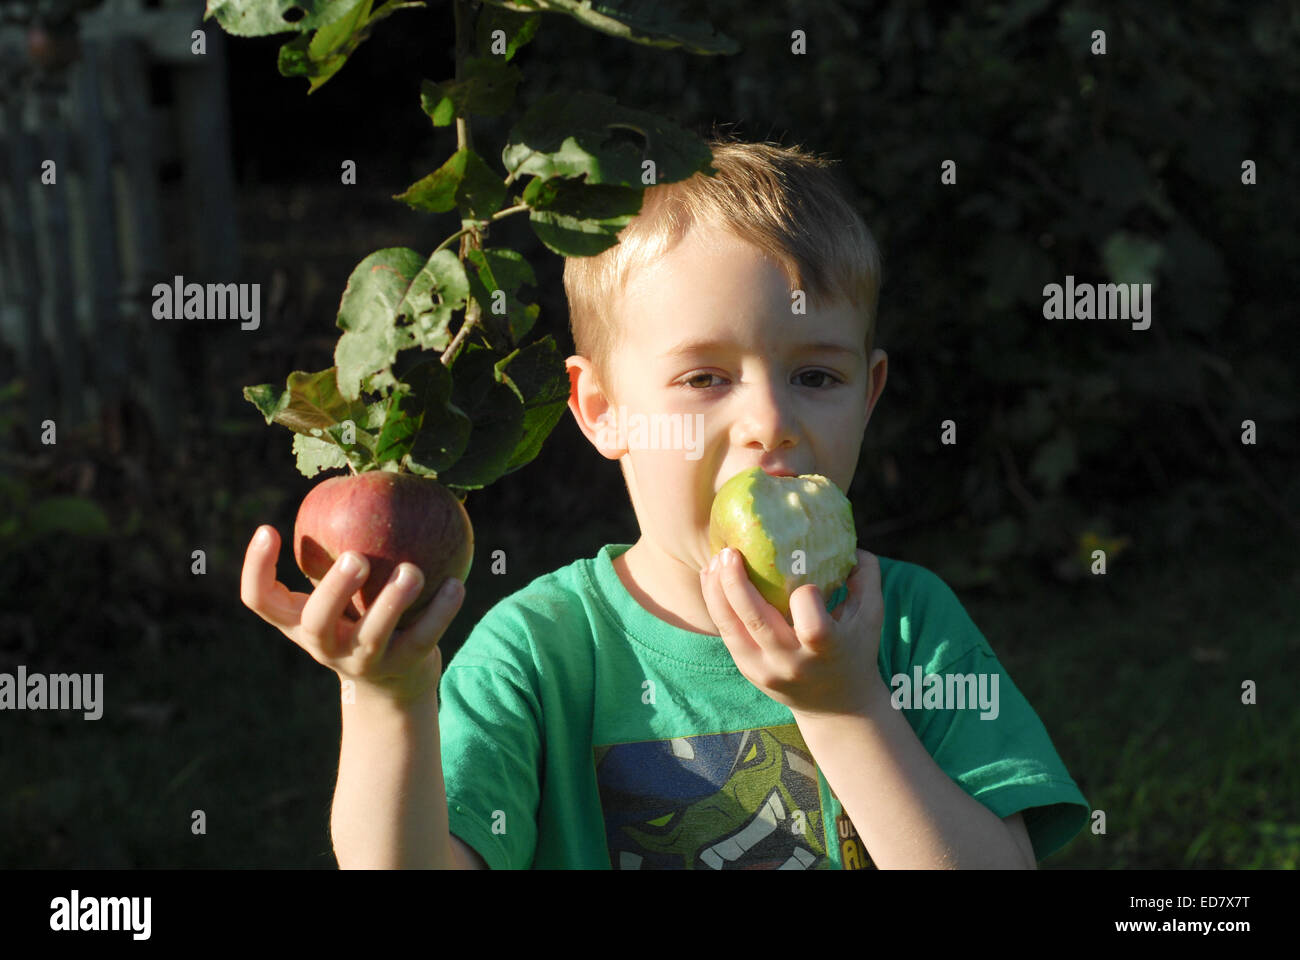 boy picking and eating fresh apples from tree Stock Photo